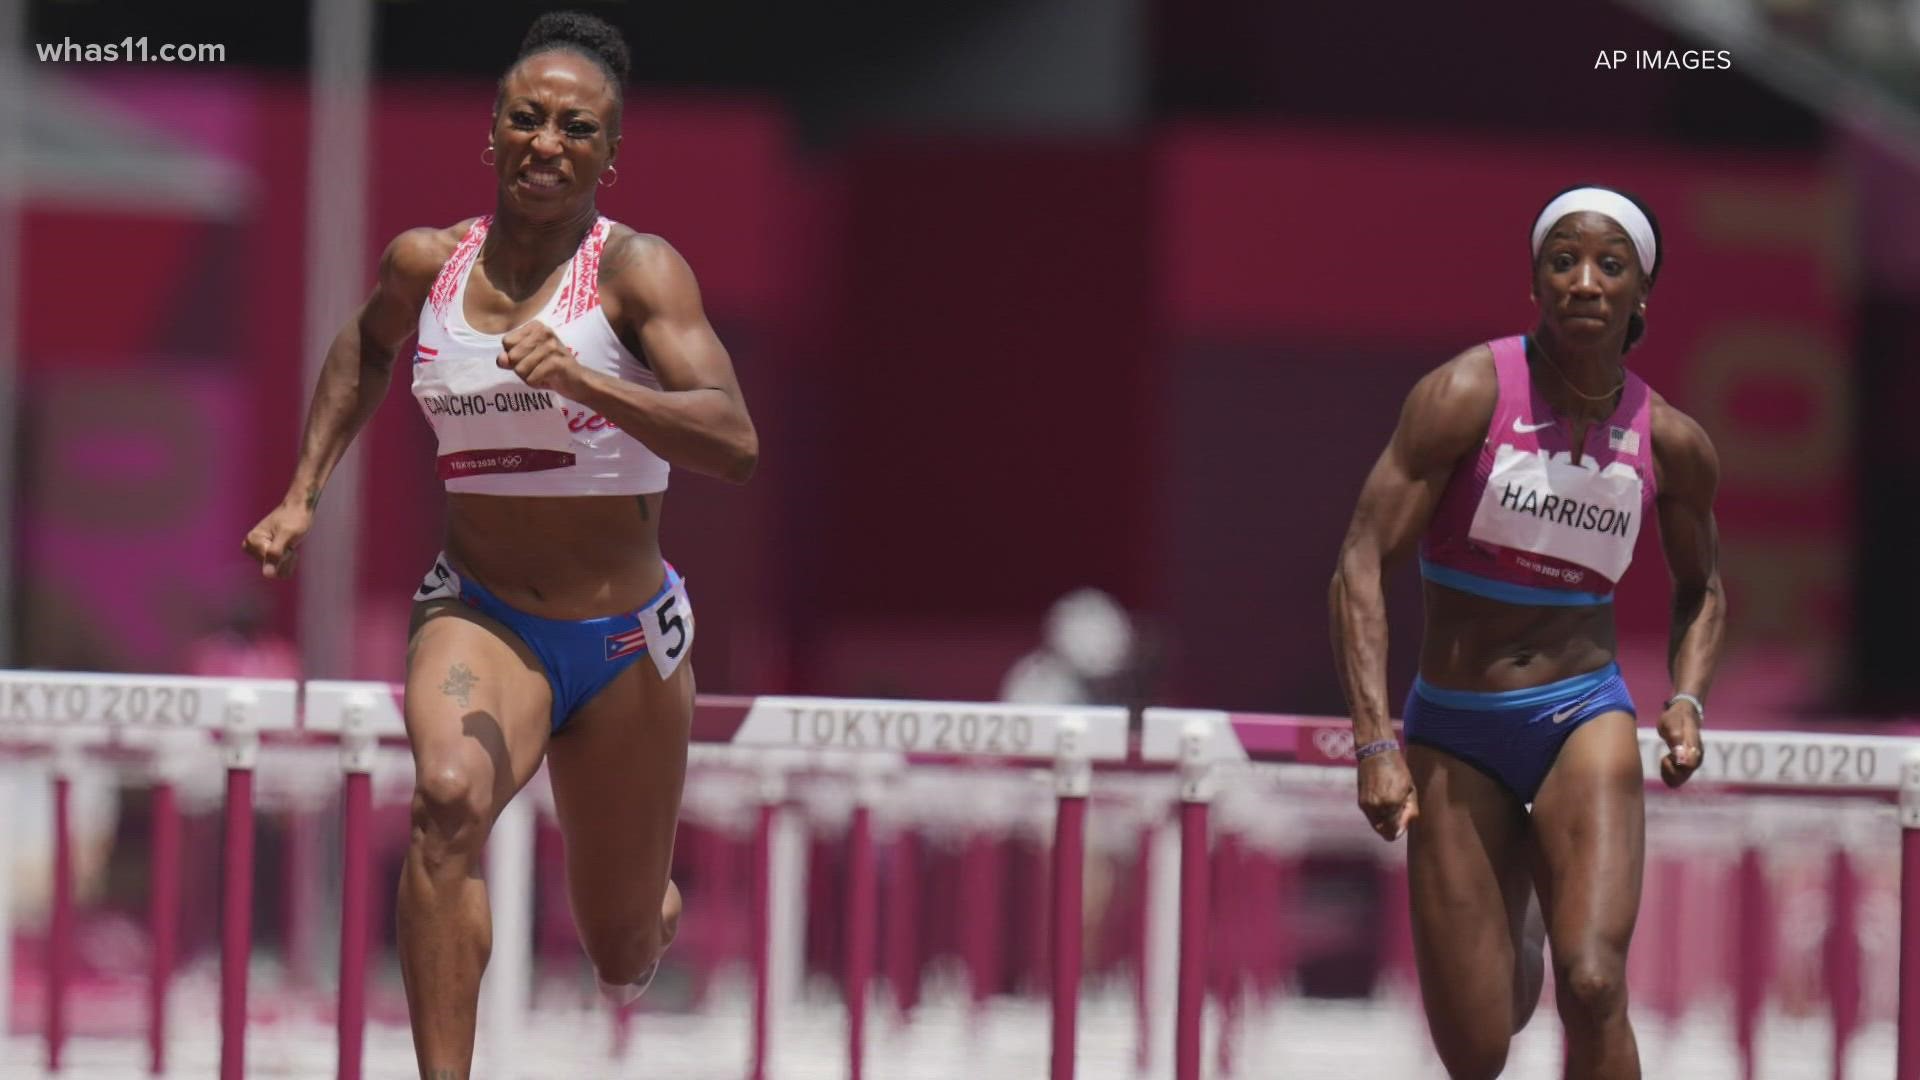 Jasmine Camacho-Quinn won Puerto Rico's second gold medal ever, while American Keni Harrison finished second in the 100-meter hurdles.